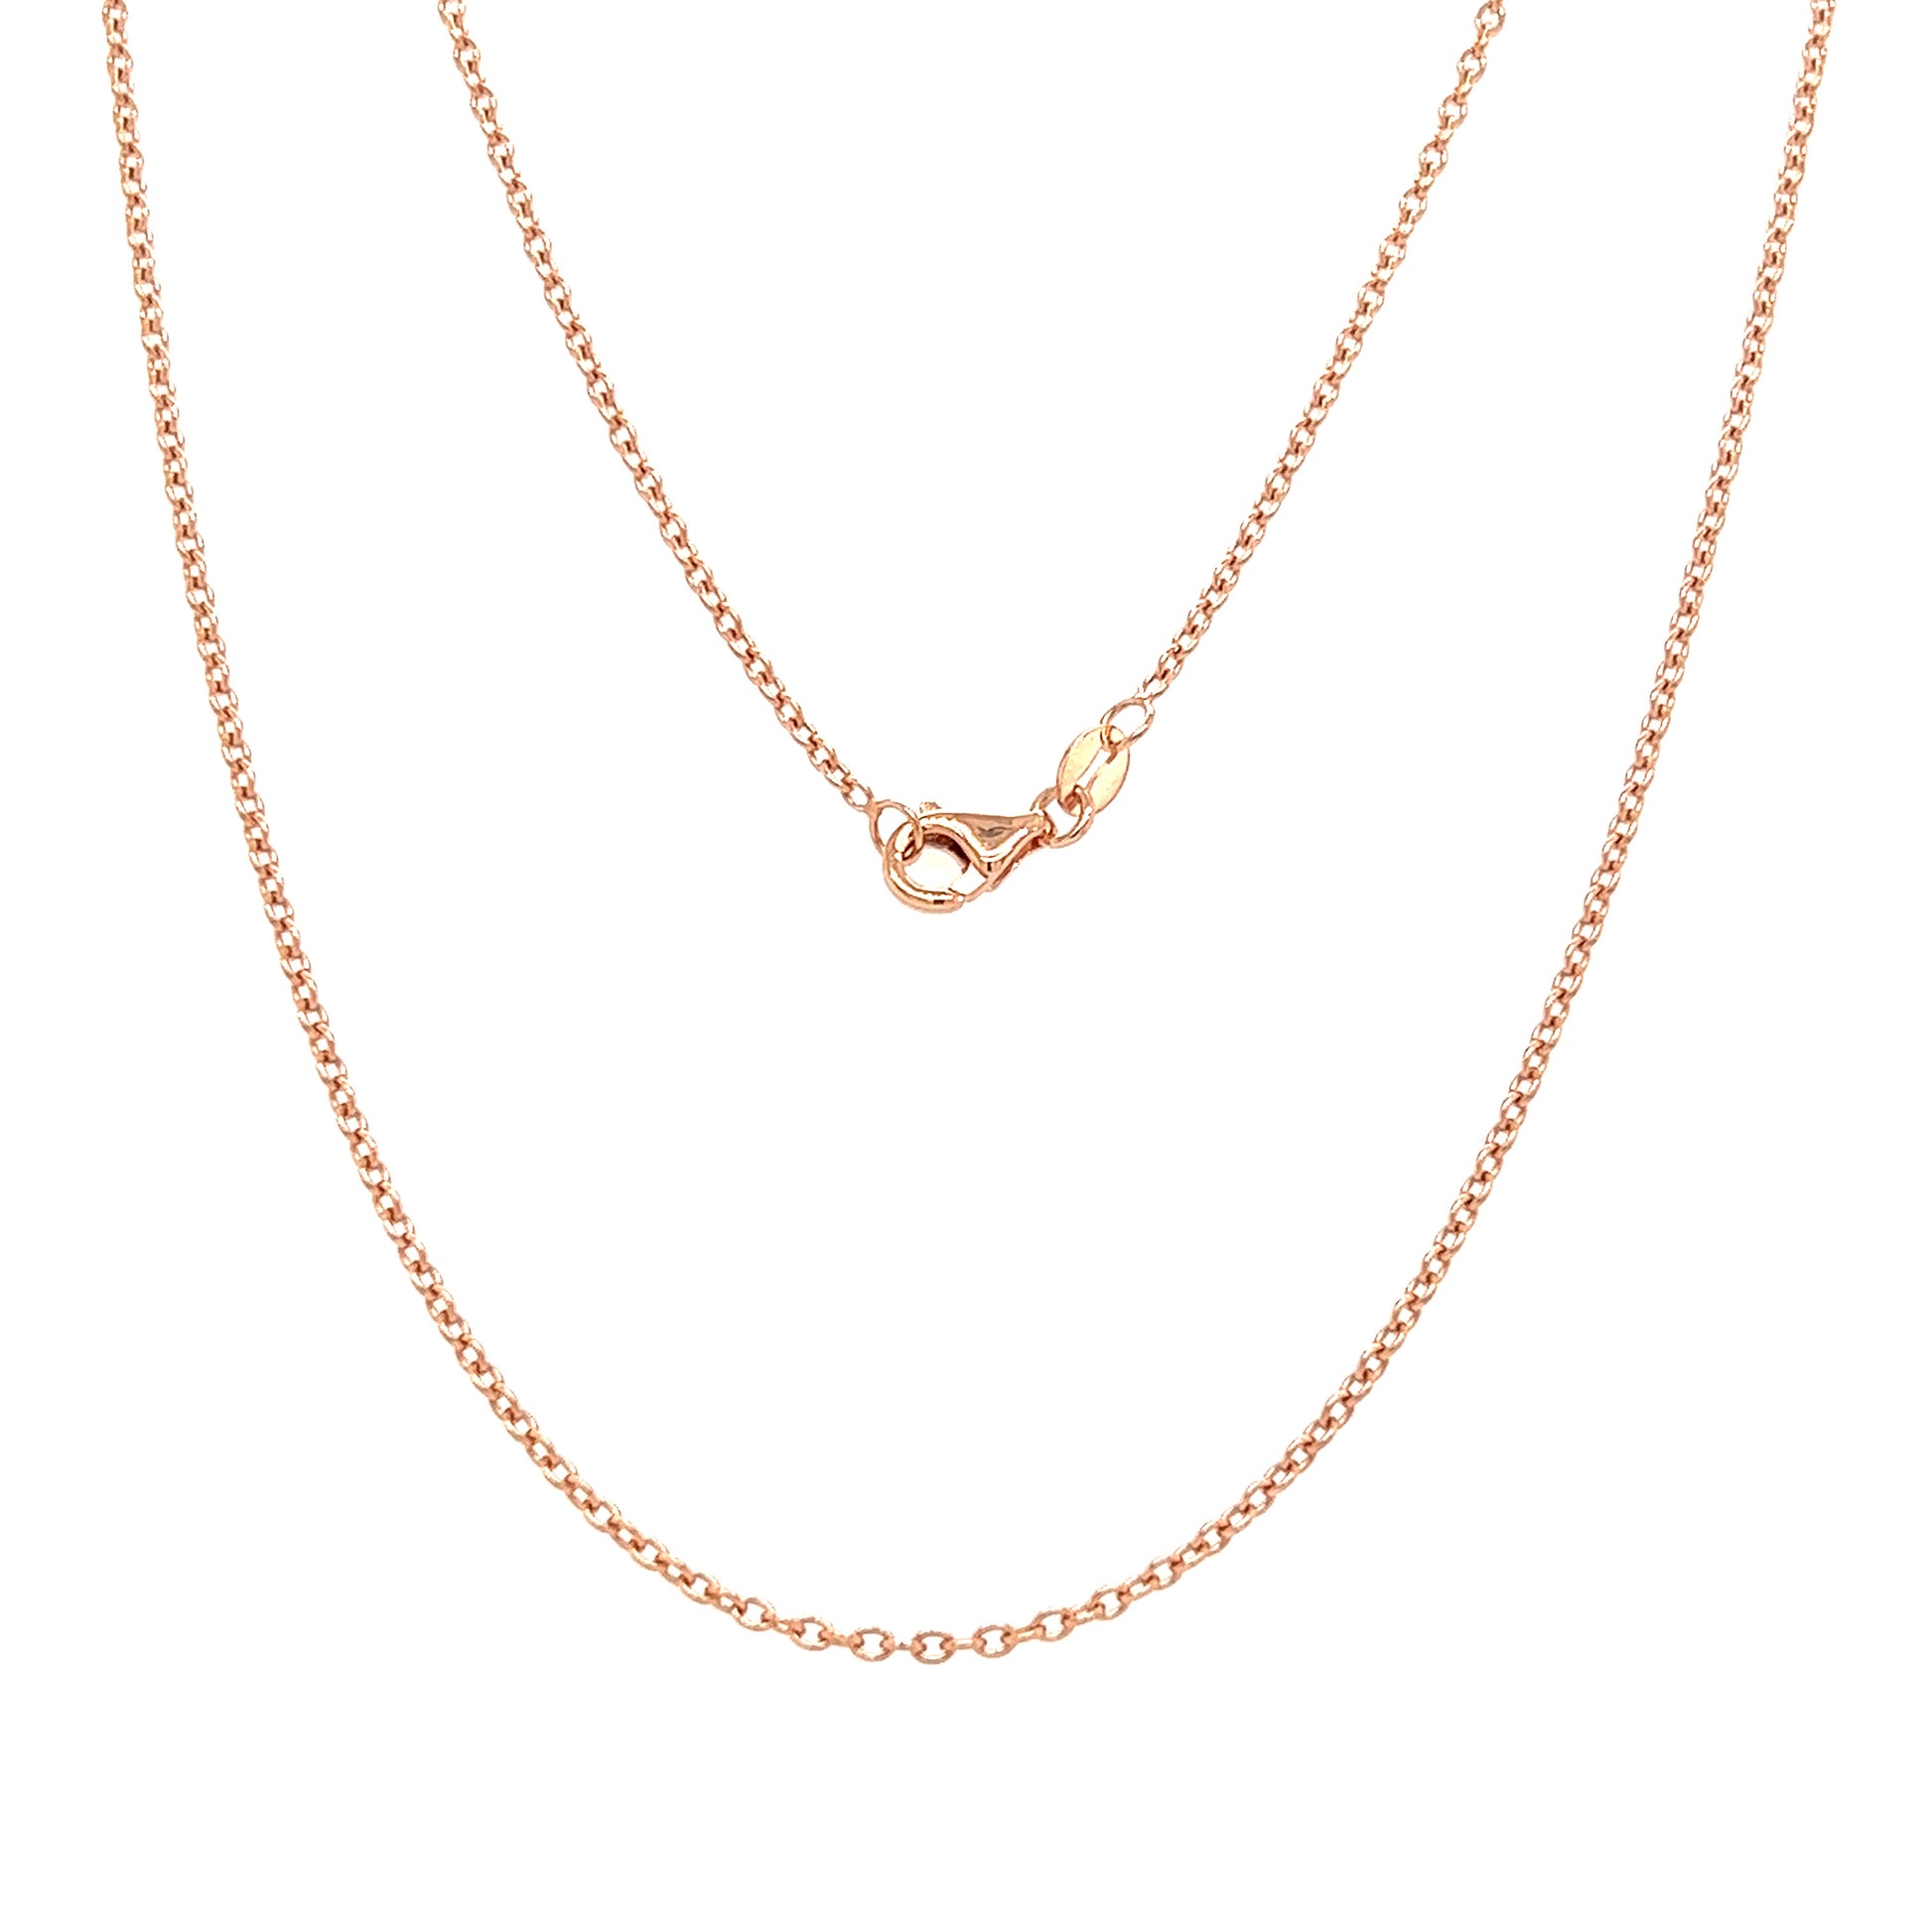 Cable Chain 1.5mm with Adjustable Length in 14K Rose Gold Full Chain View